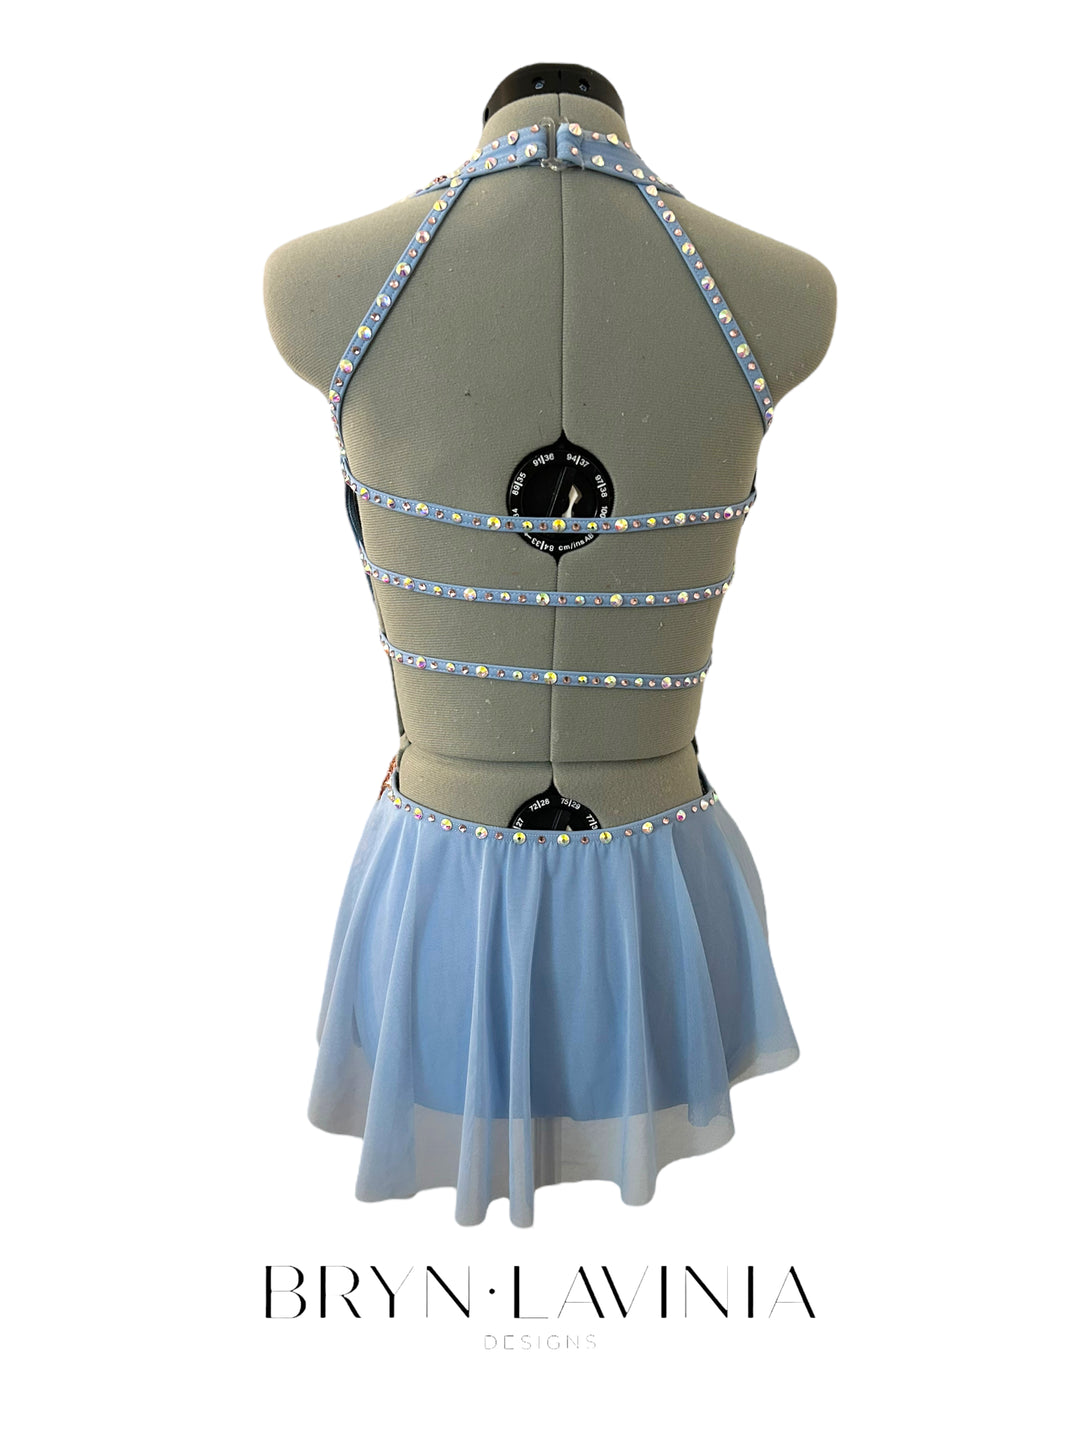 NEW AXS light blue/pink ready to ship costume